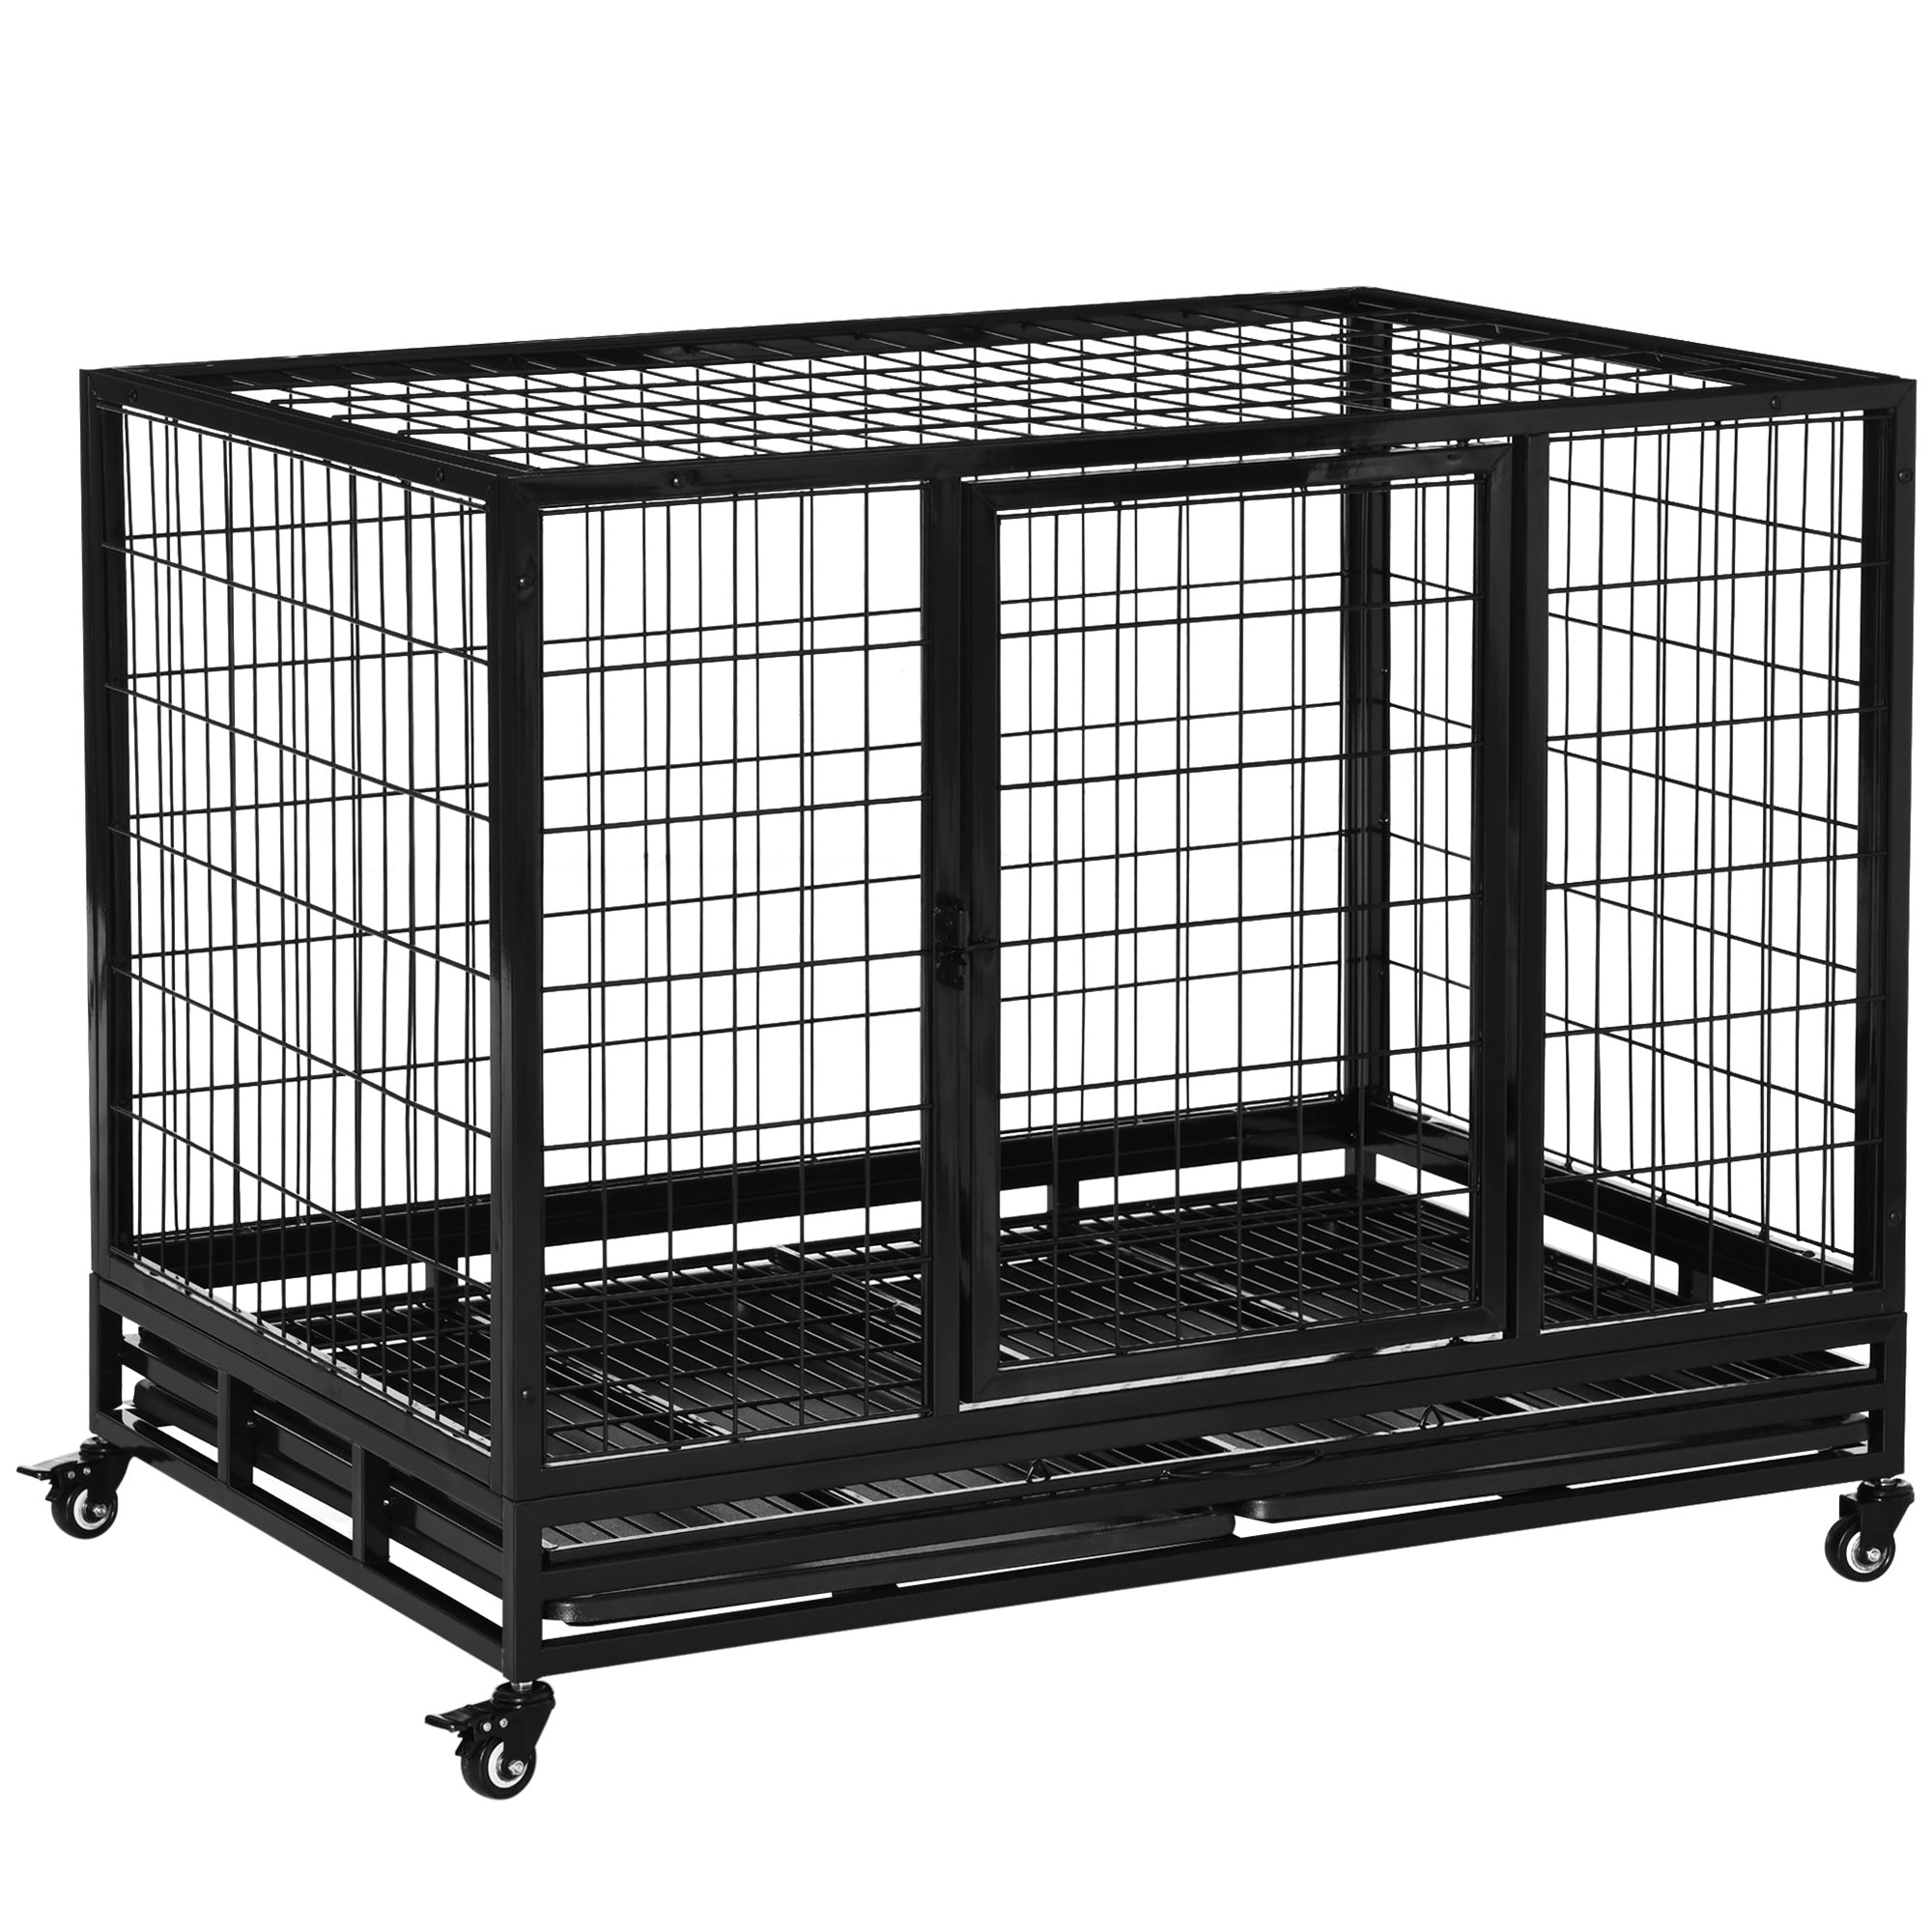 PawHut 43" Heavy Duty Metal Dog Kennel Pet Cage with Crate Tray and Wheels - Black (Large)  | TJ Hughes